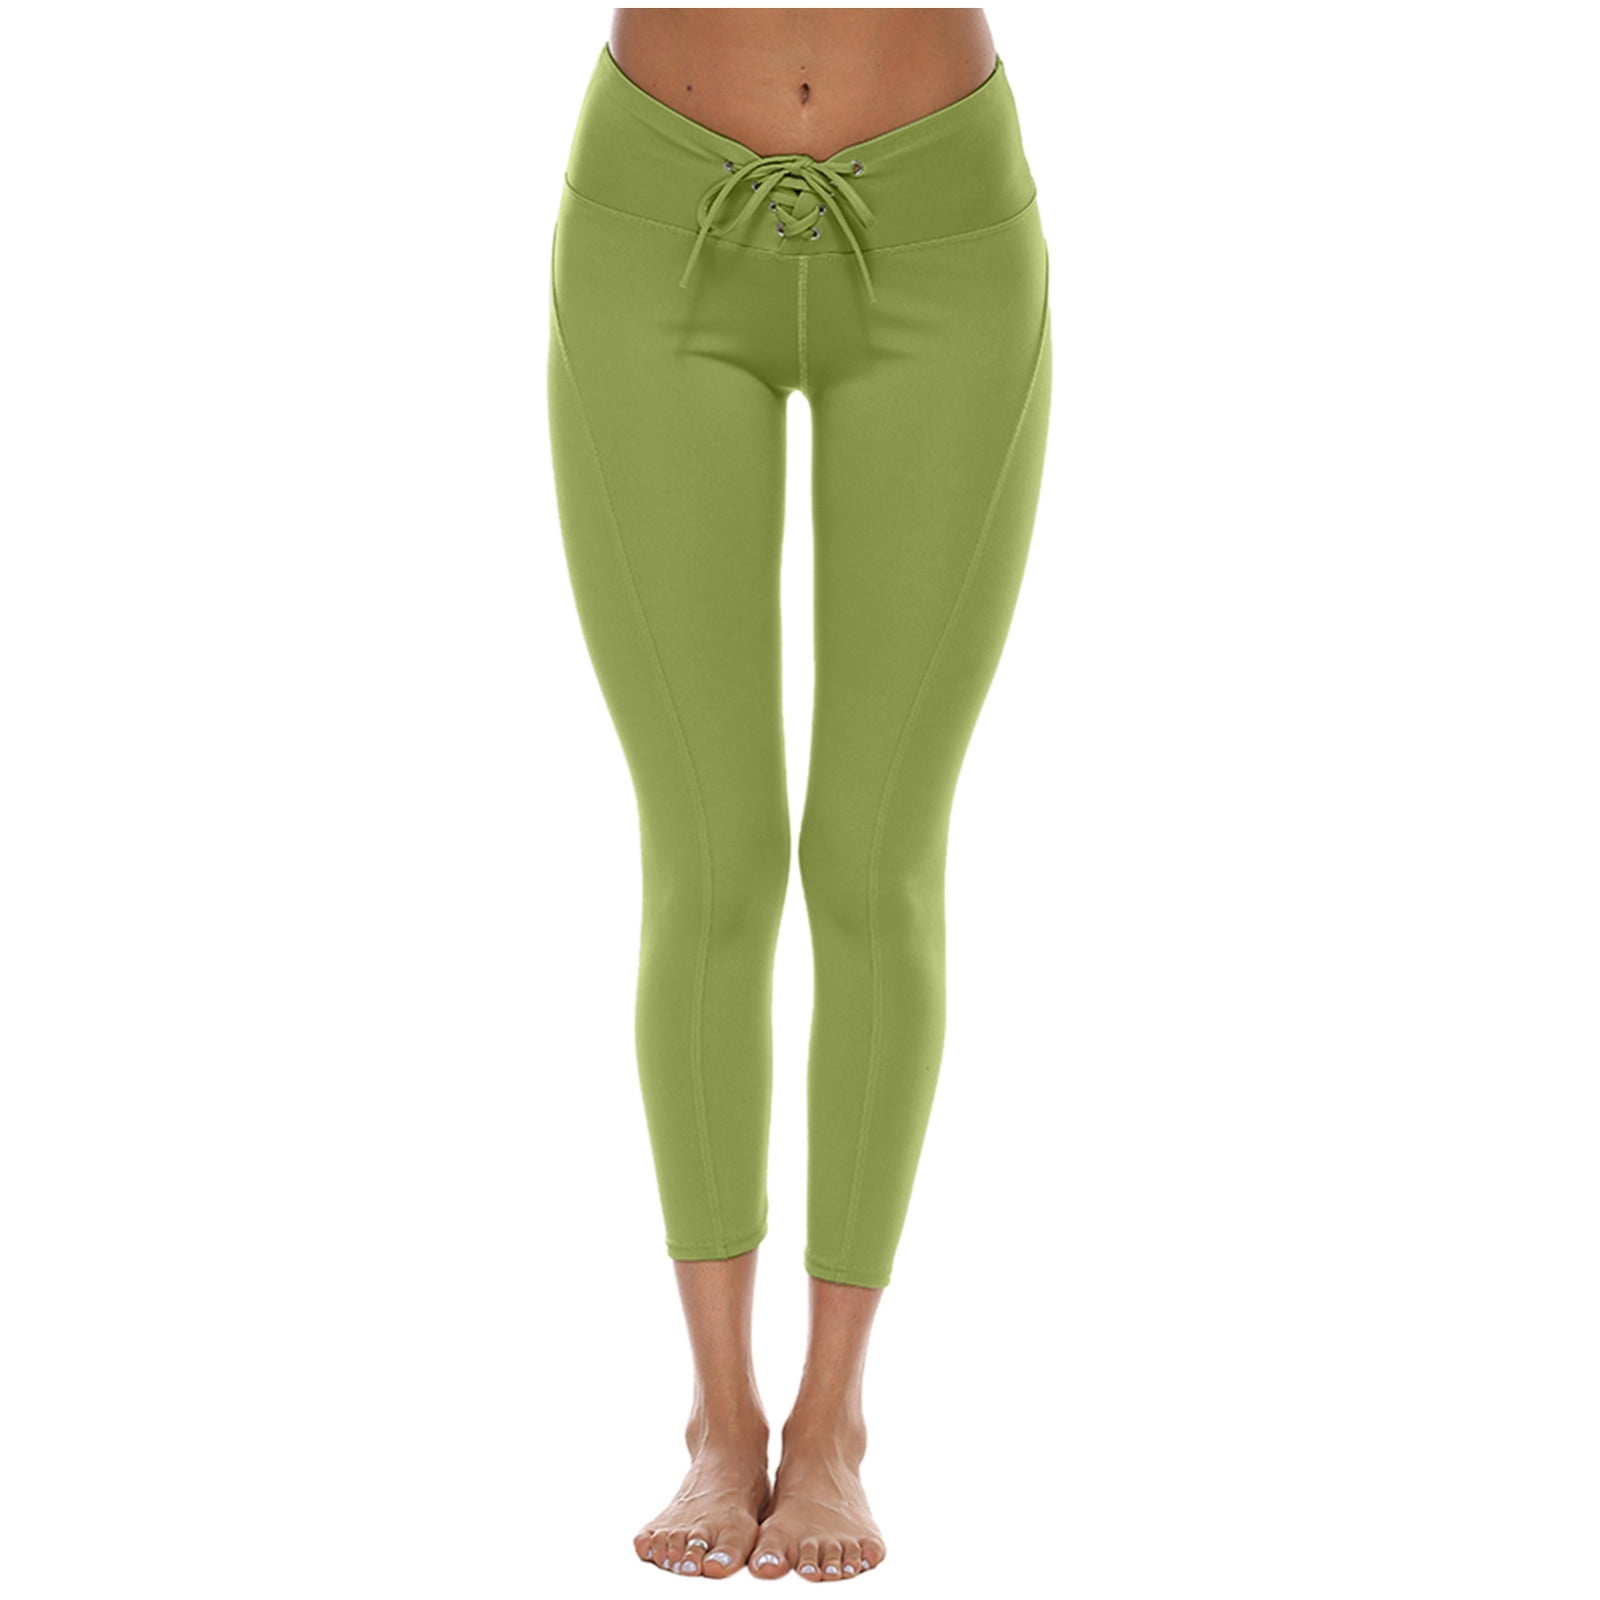 HAPIMO Sales Women's Drawstring Yoga Pants Workout Pants Slimming Stretch  Athletic High Waist Tummy Control Hip Lift Tights Running Yoga Leggings for  Women Green L 